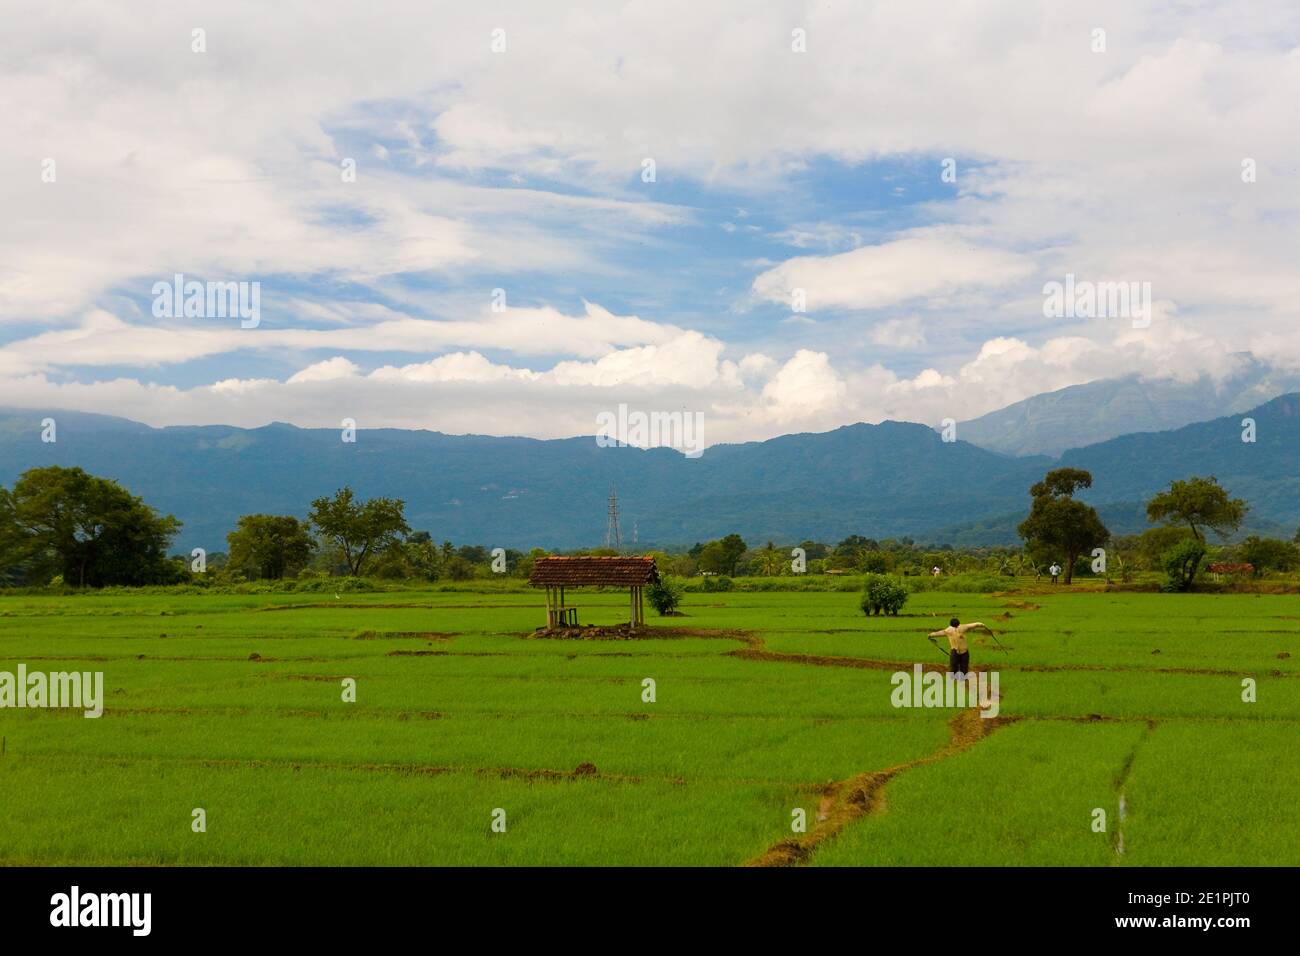 A scarecrow is standing in a rice field. Agriculture Sri Lanka. Stock Photo